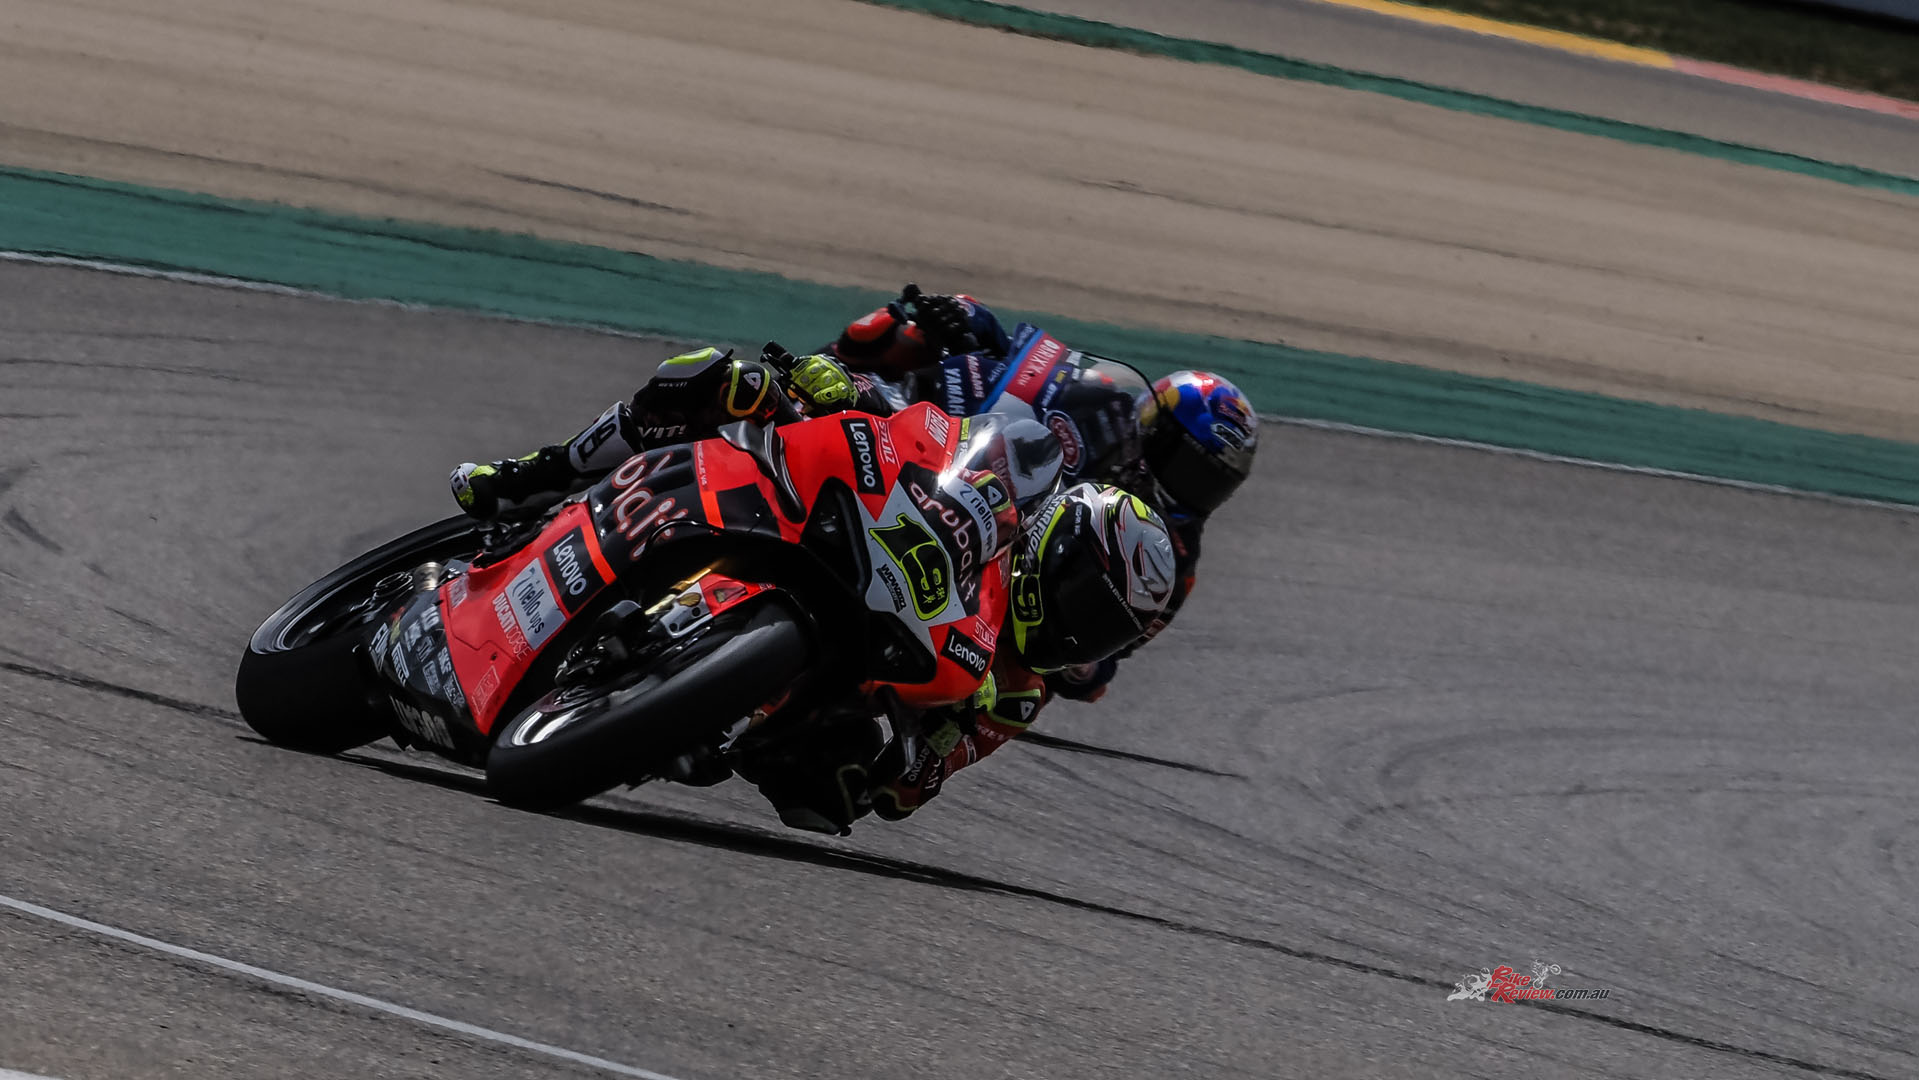 Spain’s Alvaro Bautista is beaming and “in love” with his Ducati after a near-perfect weekend saw him take two victories on Sunday and a second-place on Saturday in the opening round of the 2022 MOTUL FIM Superbike World Championship.